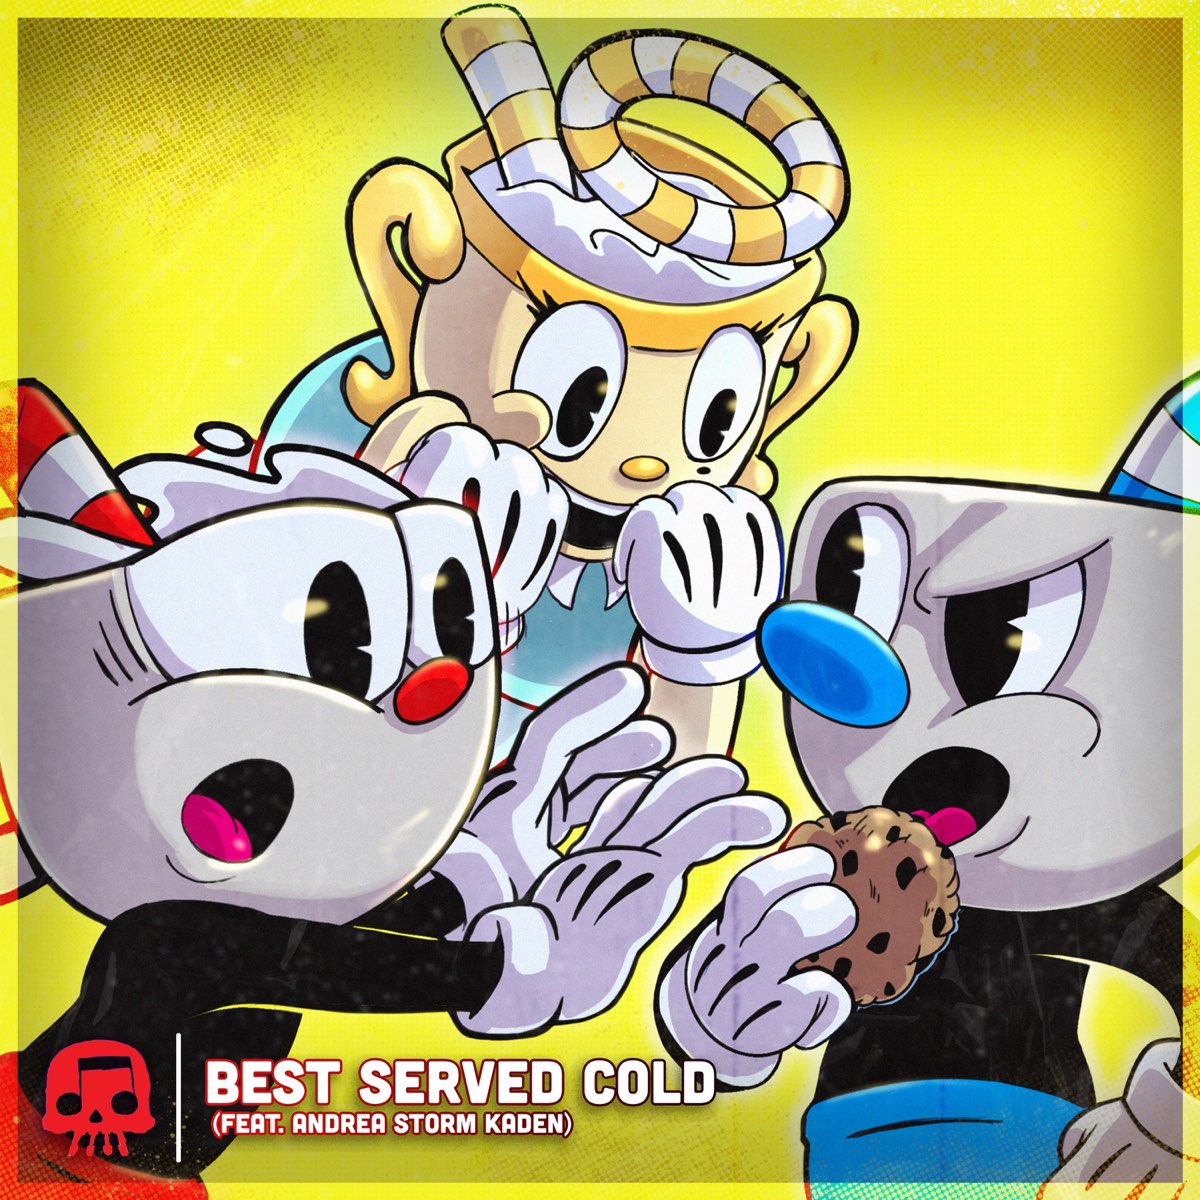 Best served Cold. Cuphead the delicious last course. Best served Cold ~ Part 2 ыгпфкн ызшку. JT Music.